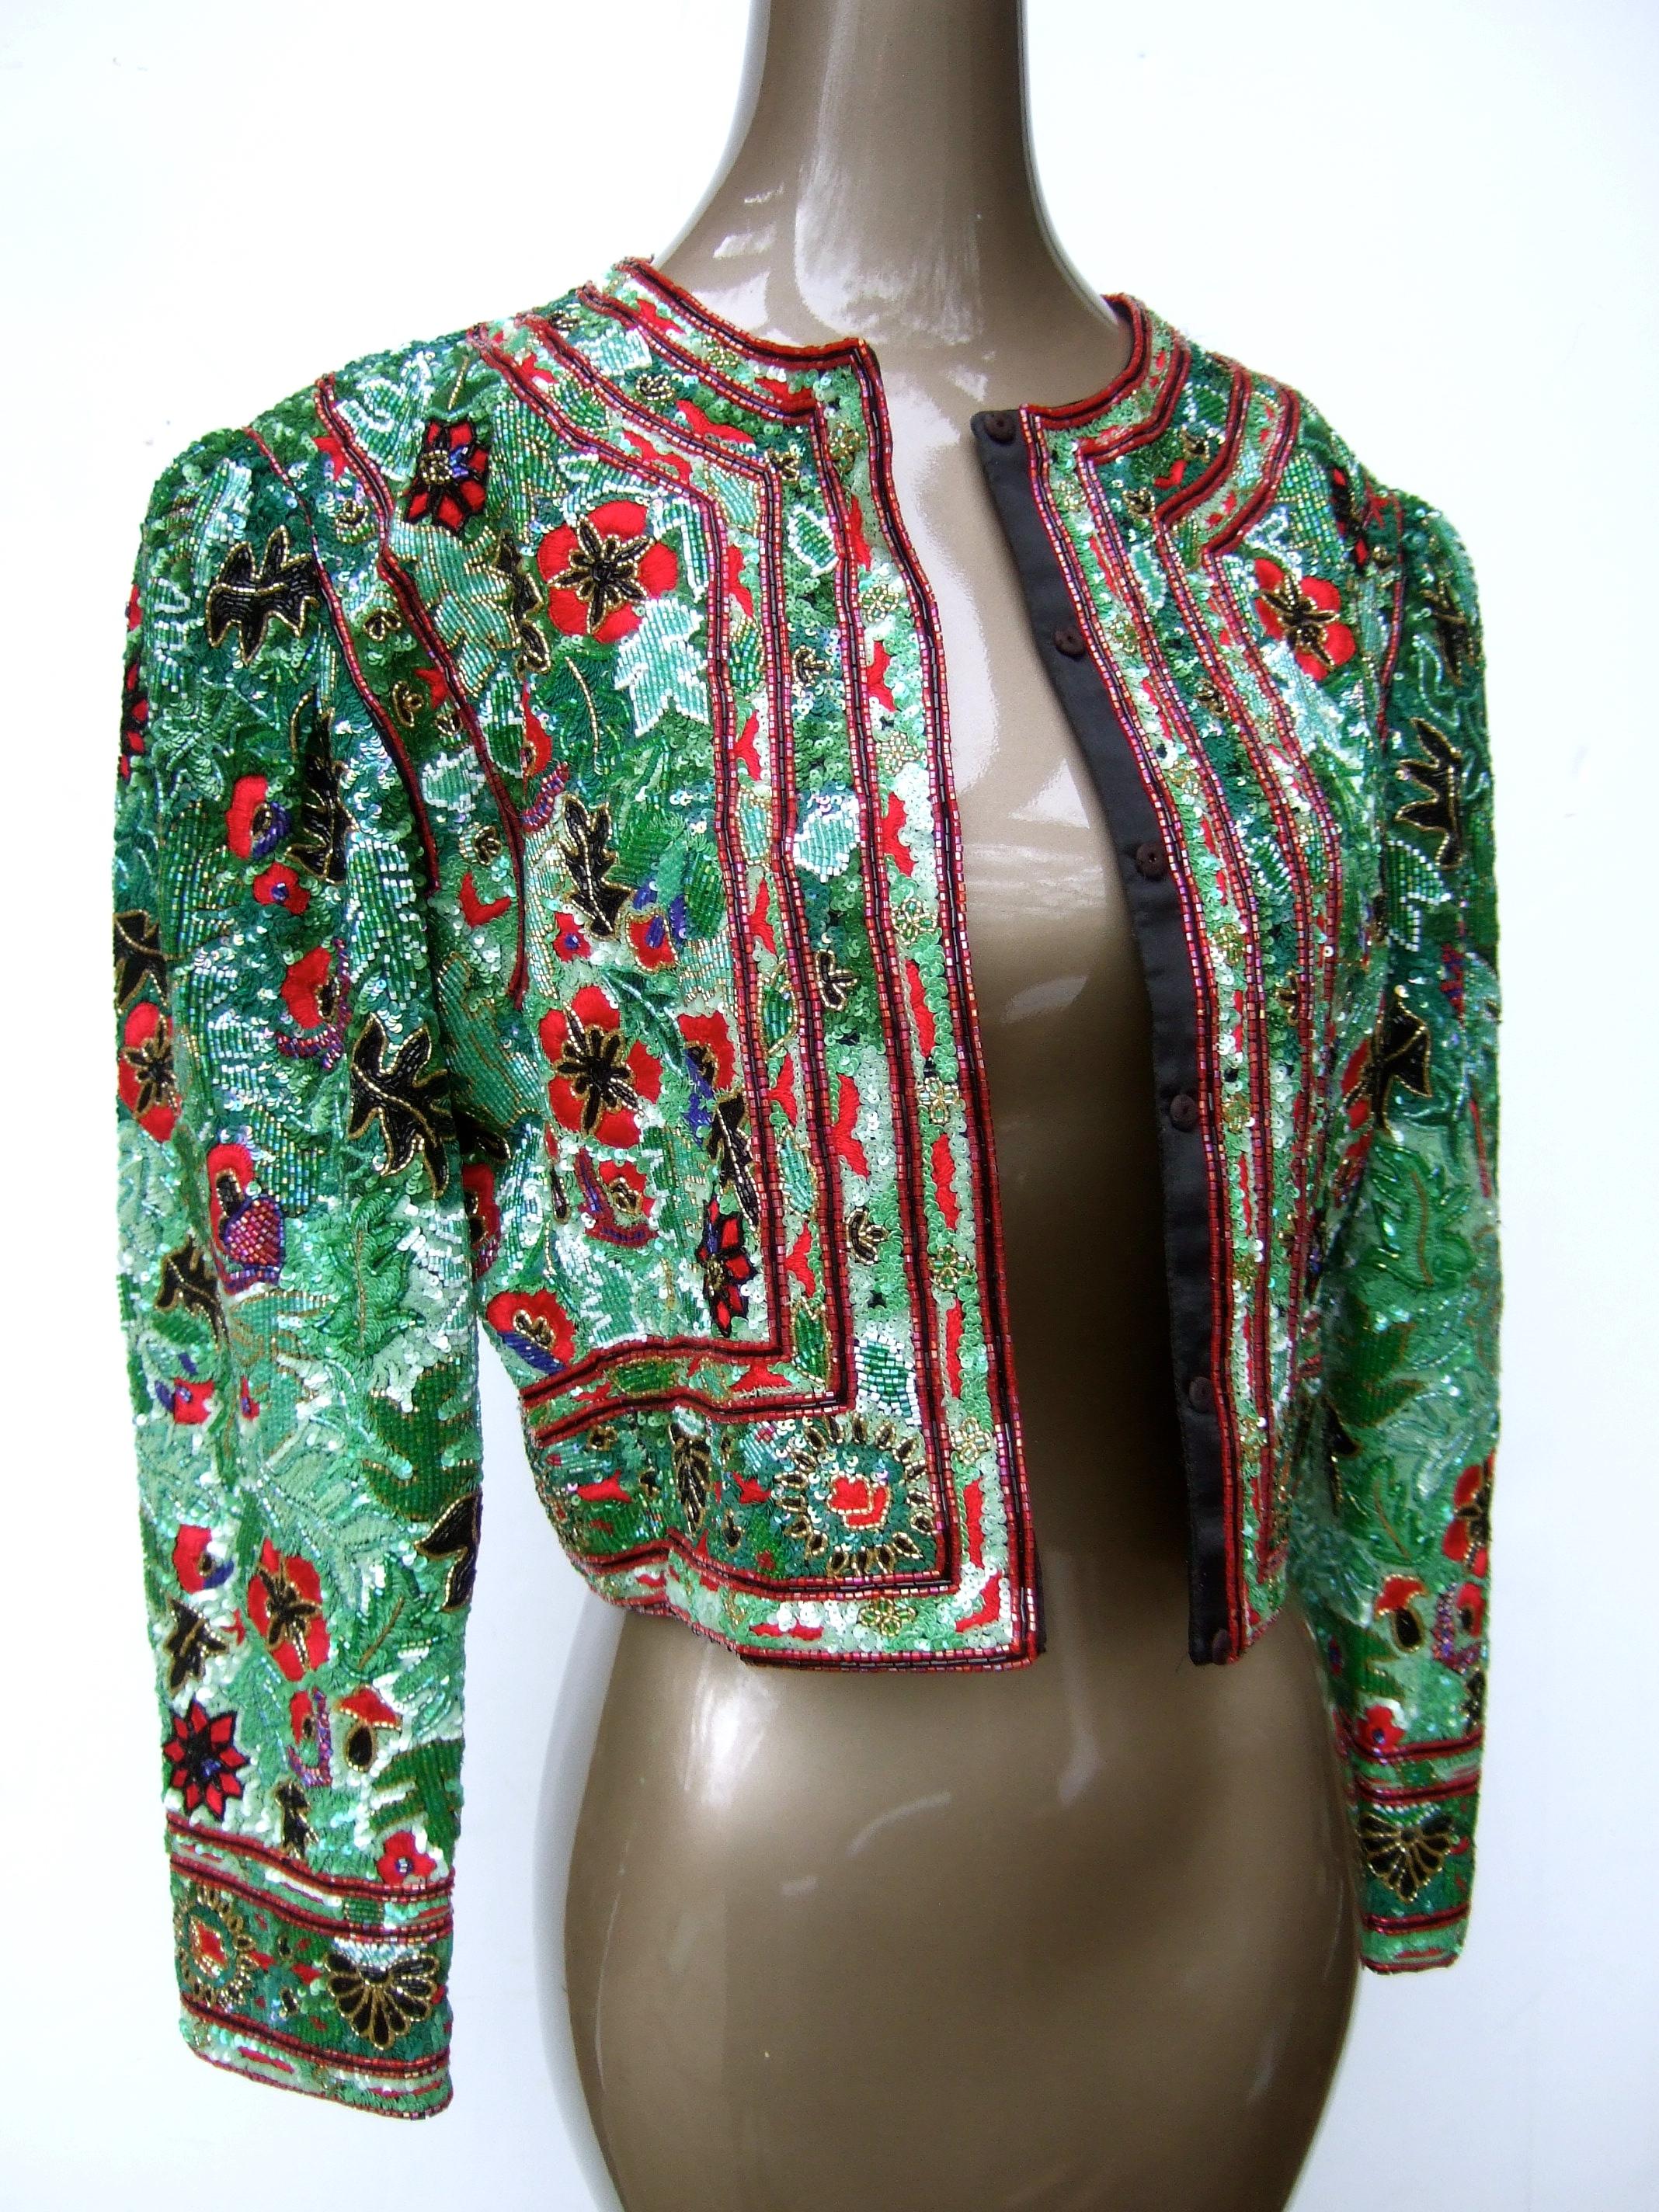 Exquisite heavy glass floral beaded embroidered bolero jacket c 1980s
The opulent glass beaded jacket is encrusted with elaborate 
hand beading accented with embroidered flowers throughout

Makes a stunning formal wear garment 
The shoulder sleeves